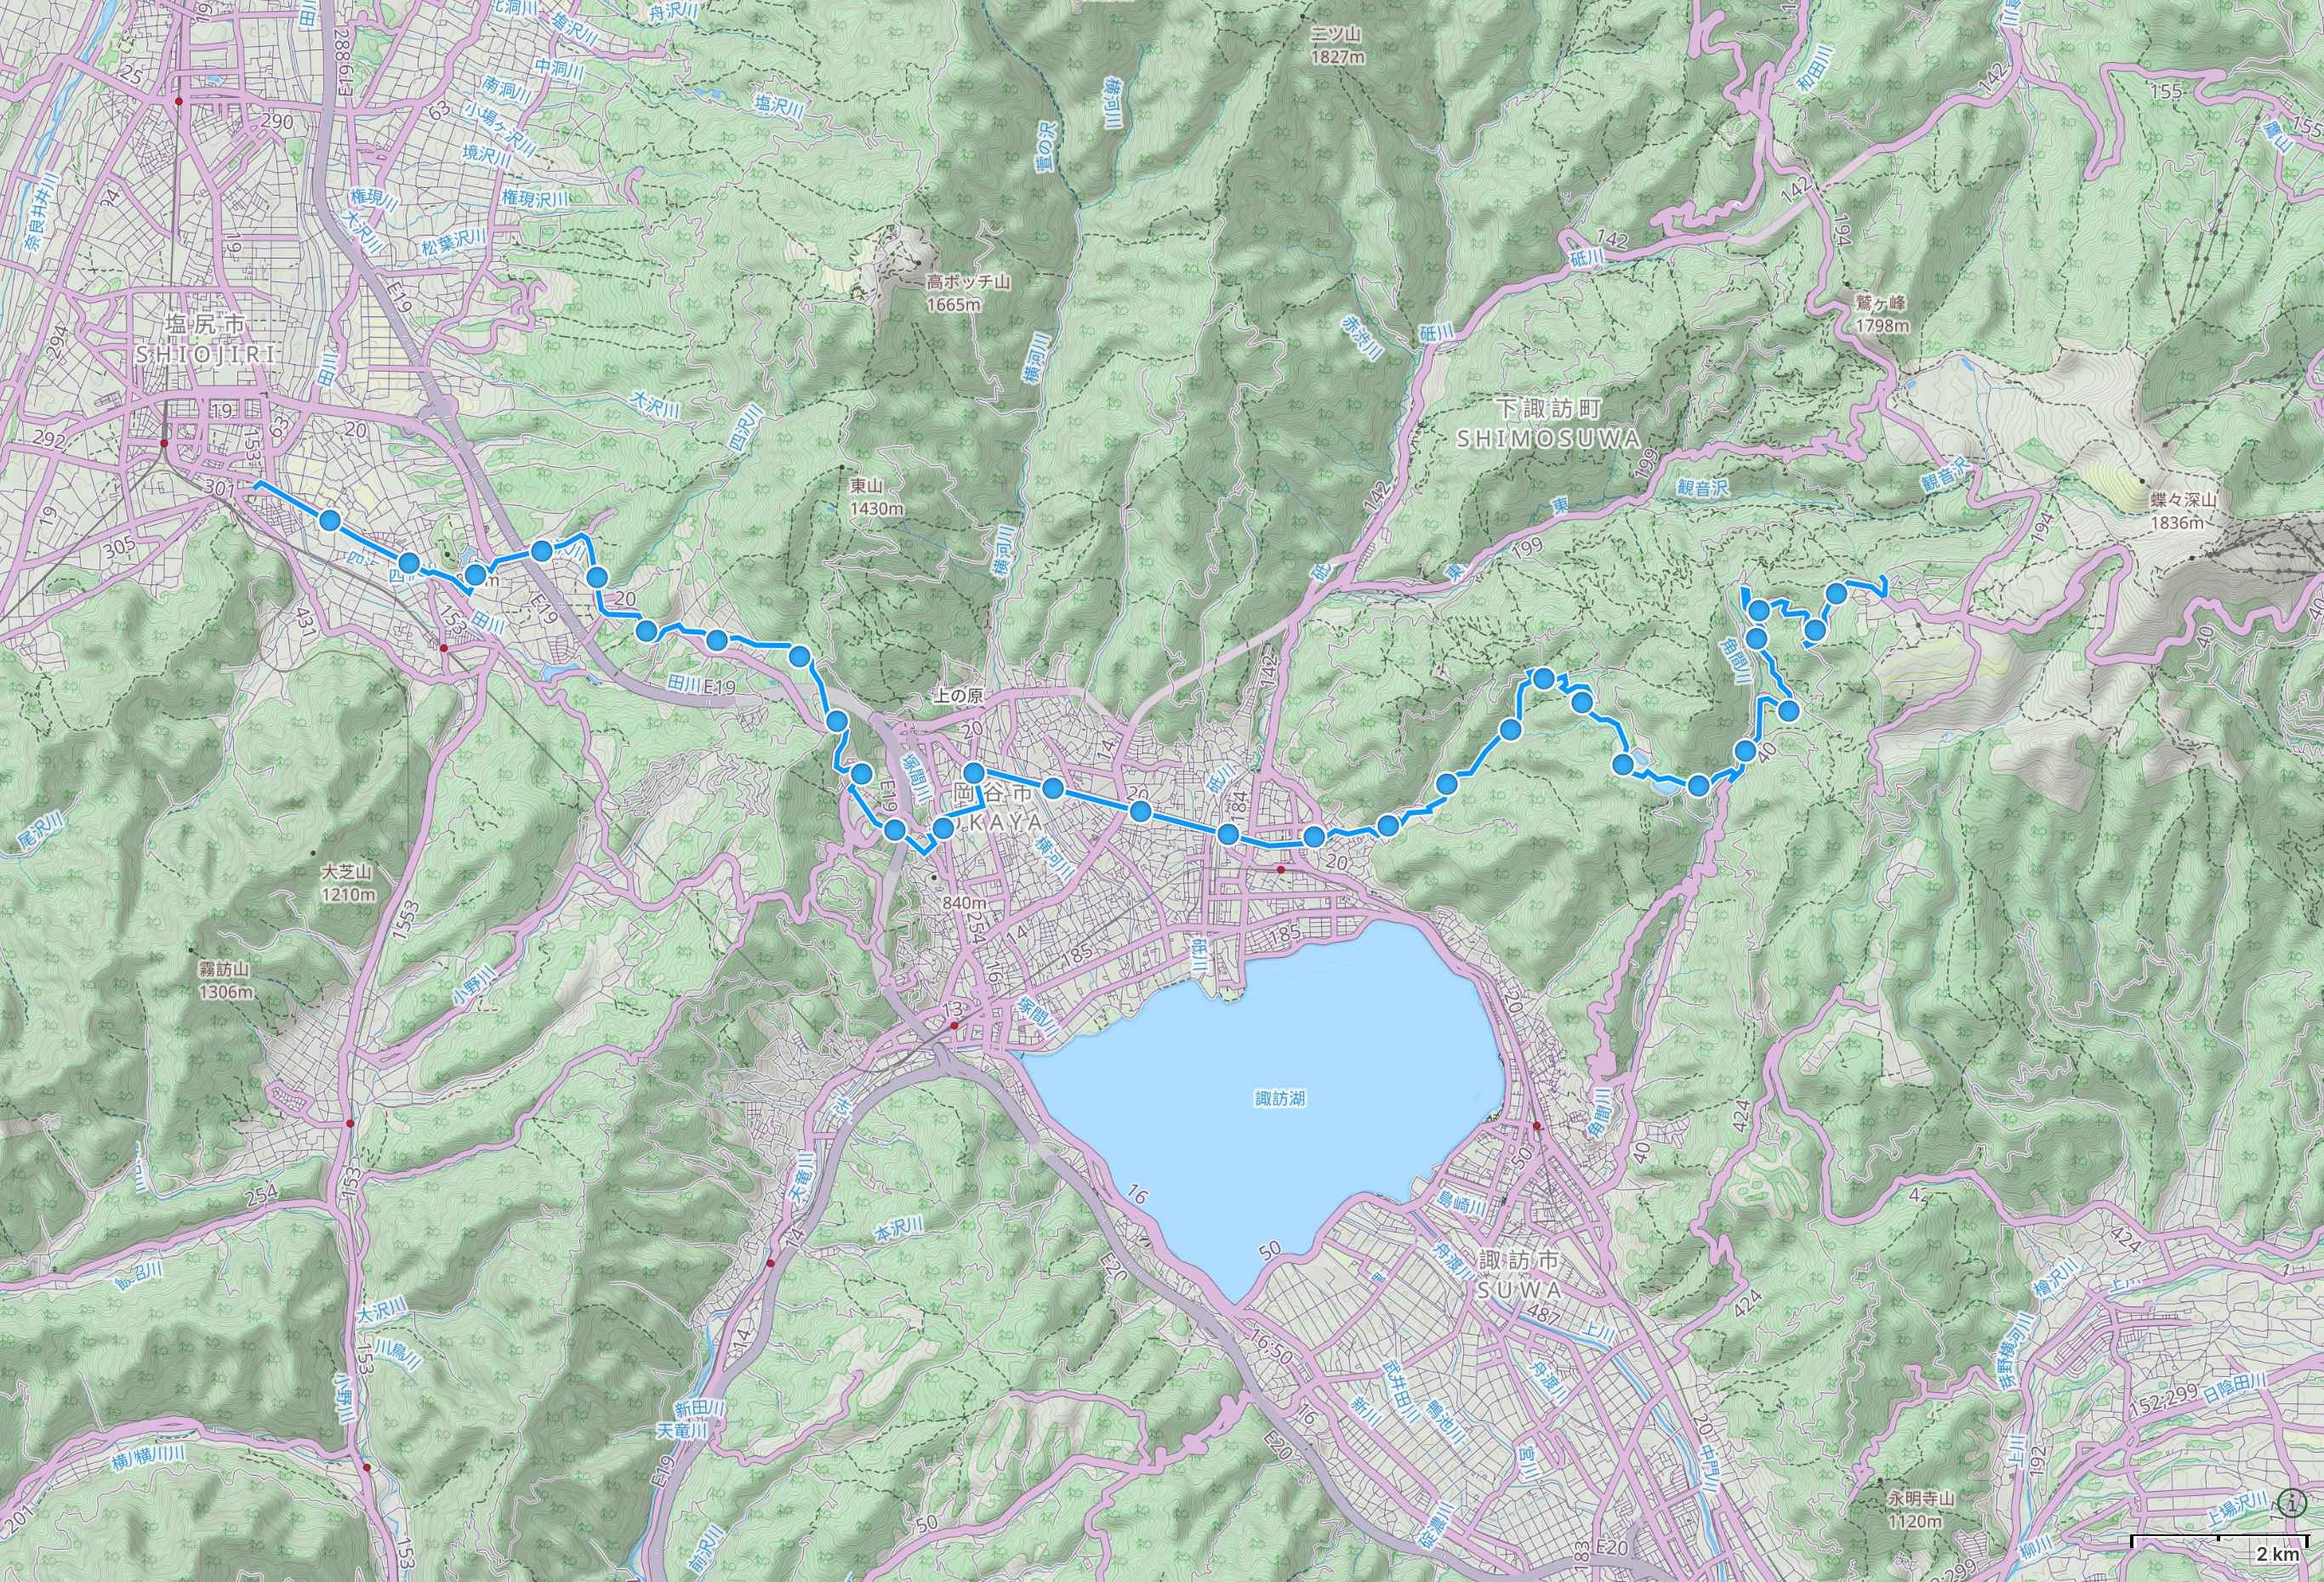 Map of Nagano with author’s route from Shiojiri to Upper Suwa highlighted.